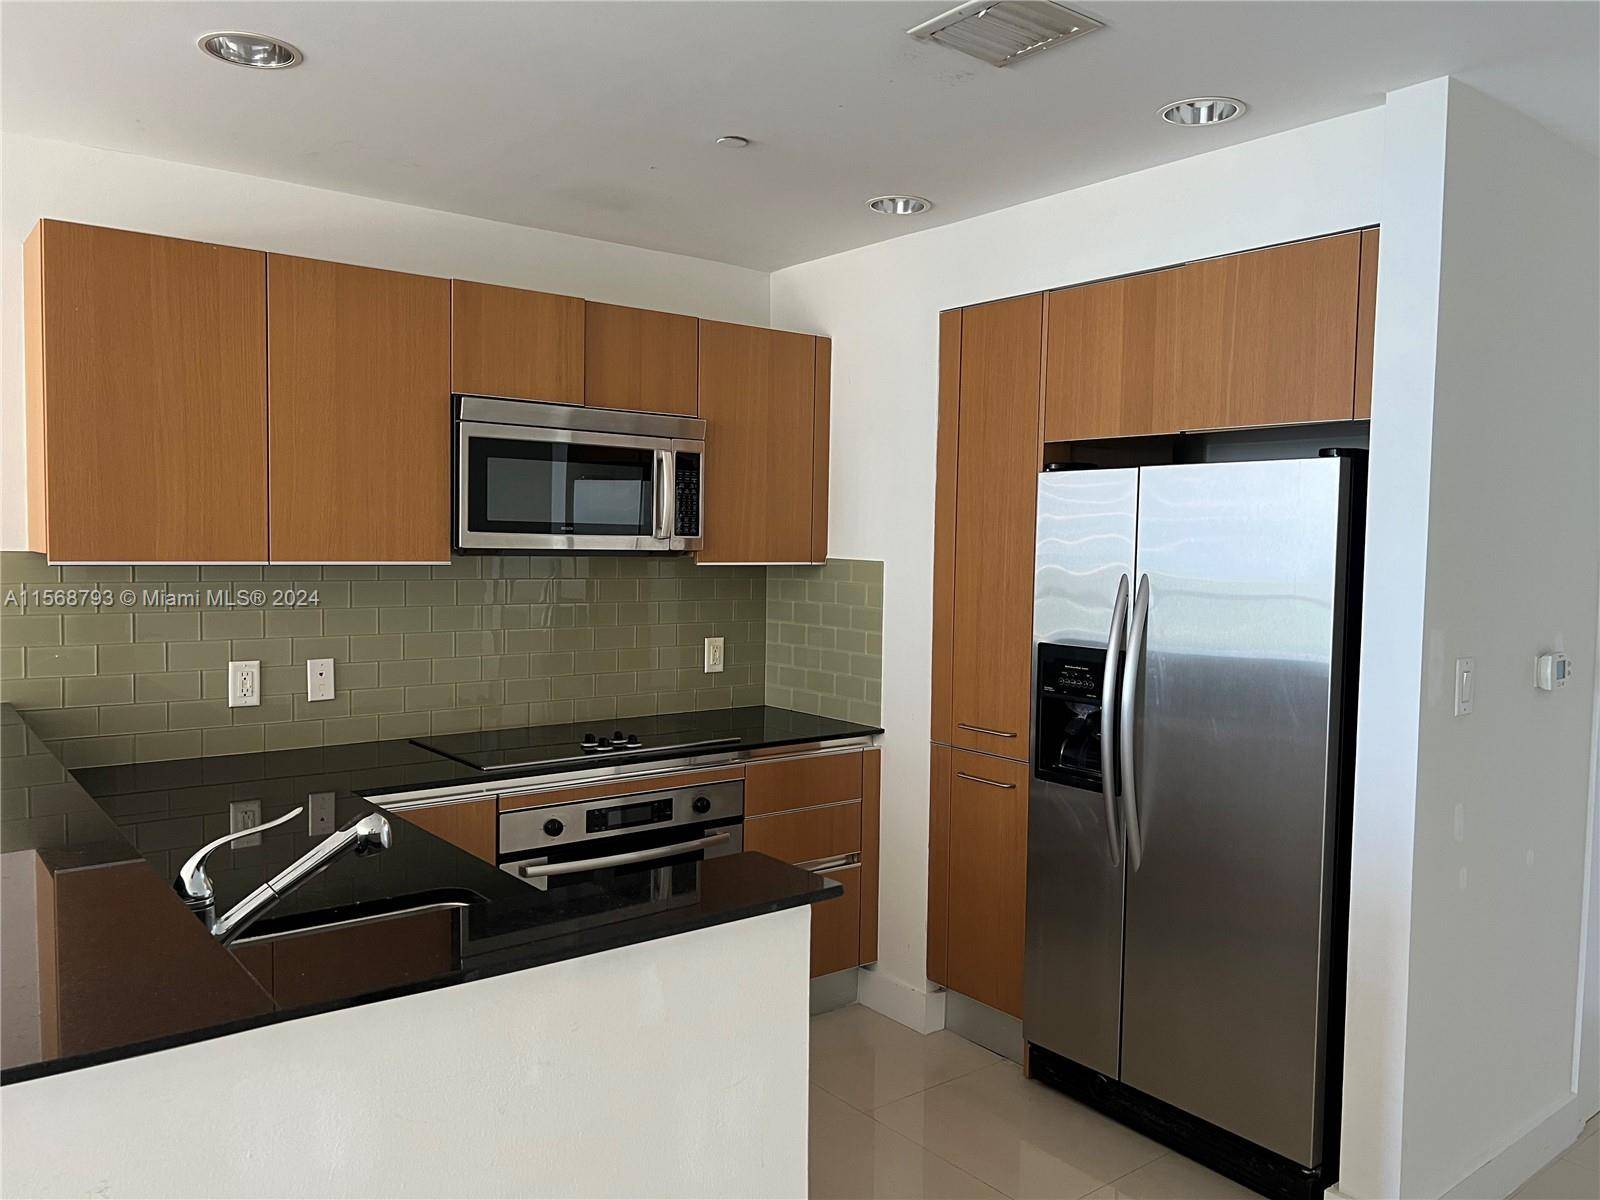 This luxurious 2 bedroom, 2 bathroom corner unit offers stunning city views from every angle.